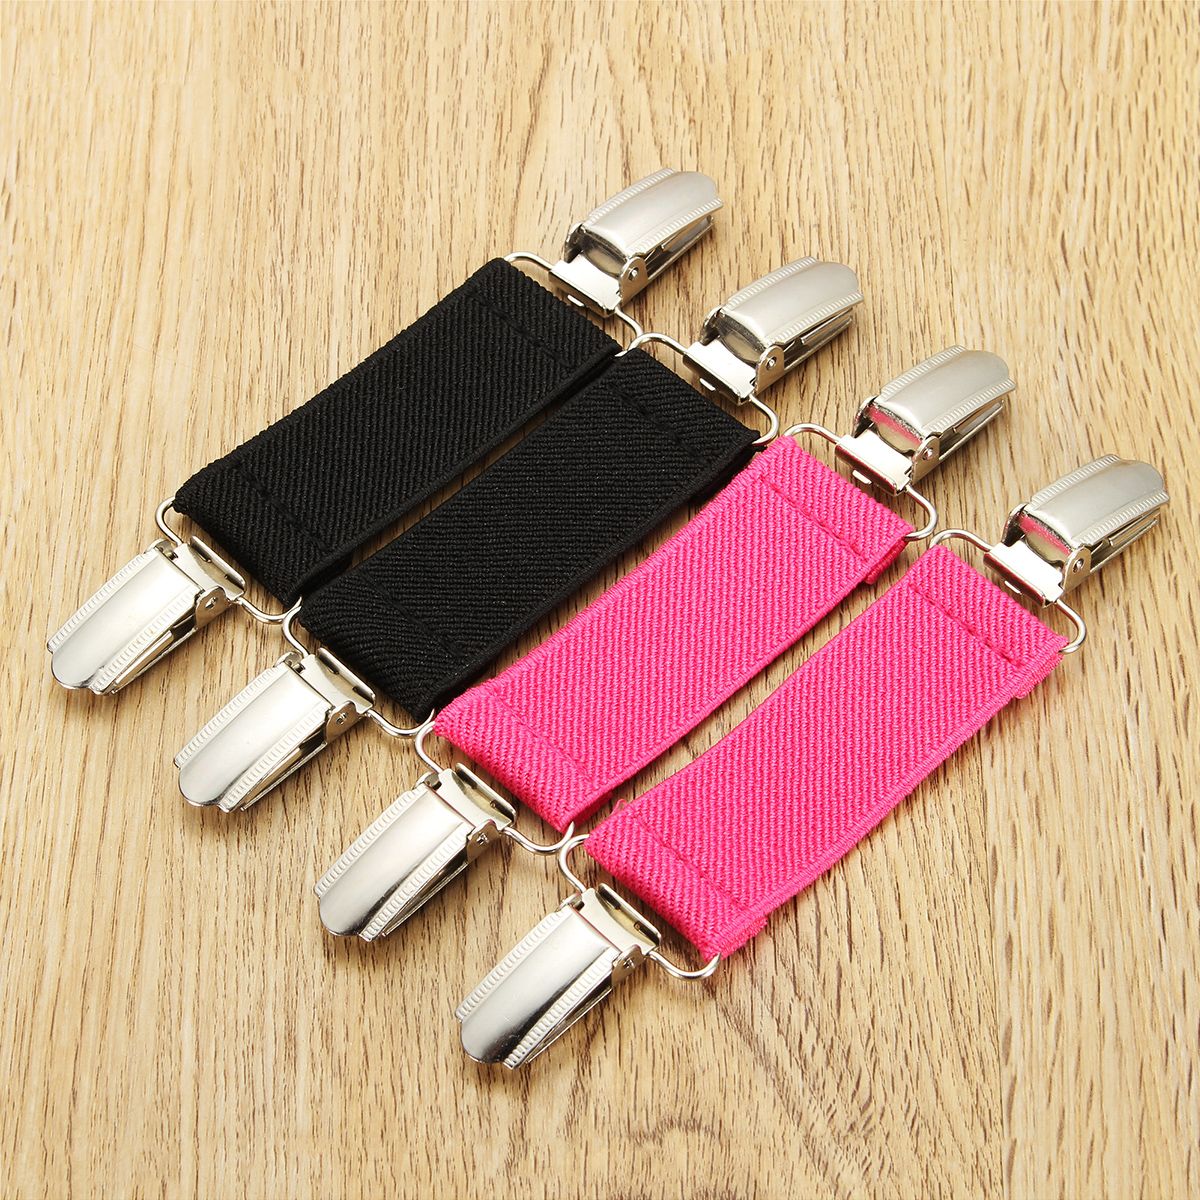 70x25mm-Stretchable-Fixed-Clamp-Clip-Extender-Webbing-Alloy-for-Pants-Bed-Sheet-1181365